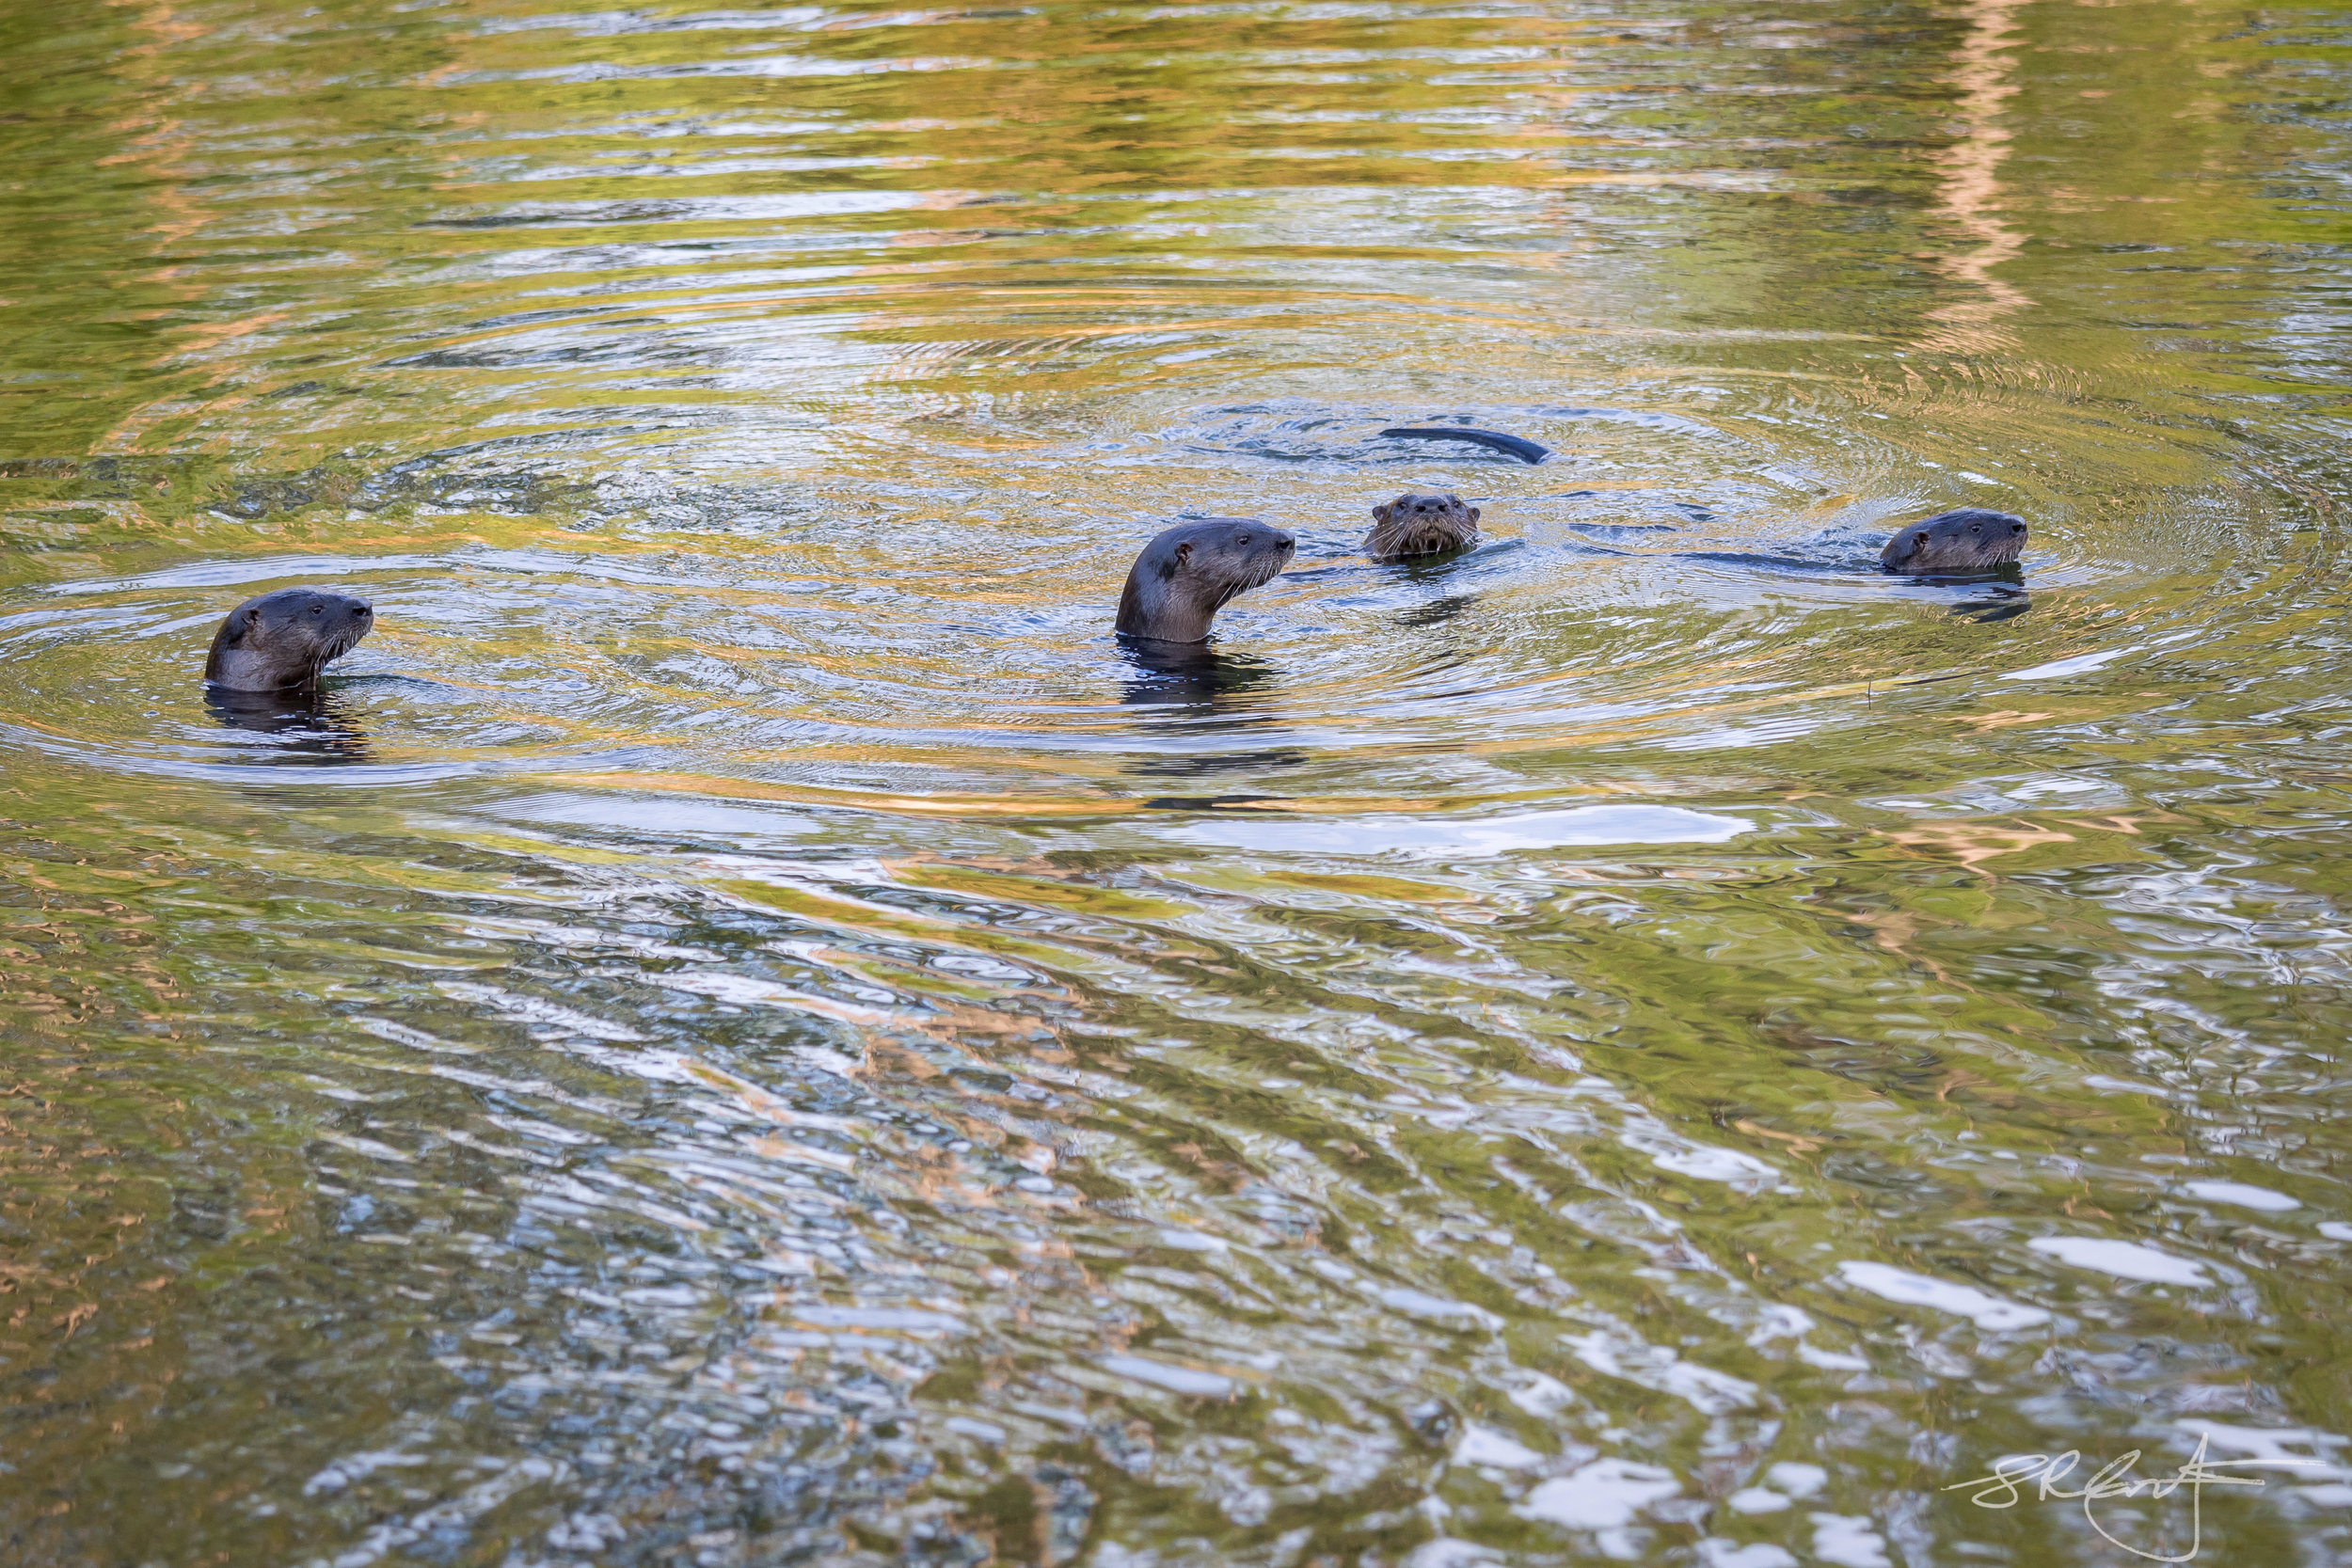 Four Otters in our Pond